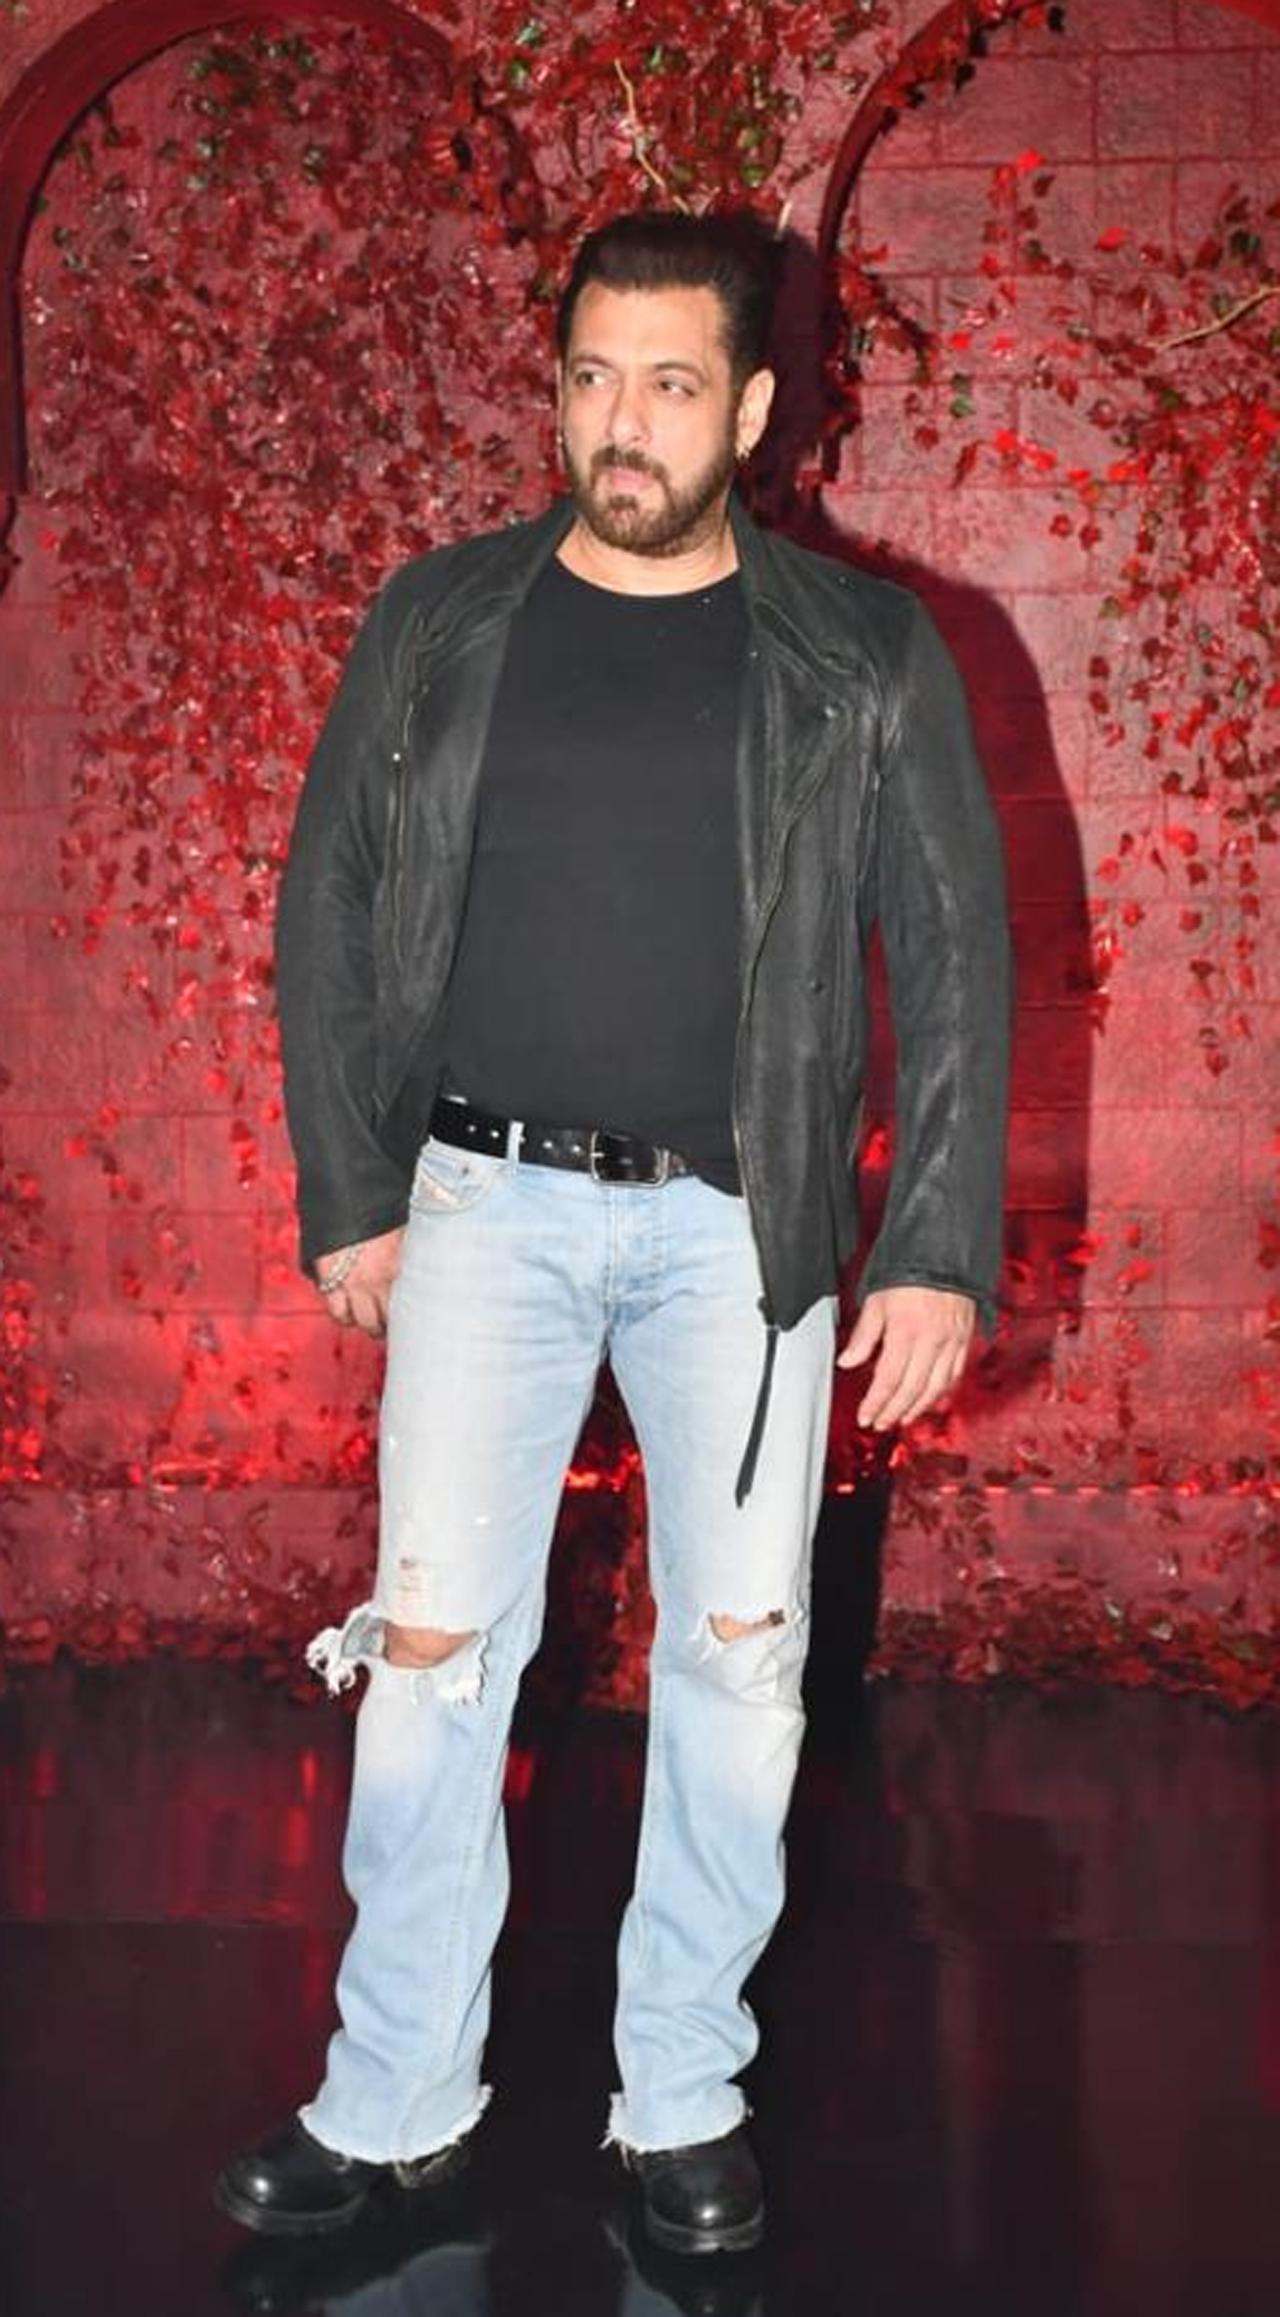 Salman Khan knows how to keep it cool yet casual. A black jacket and ripped jeans is all that it takes for him to show his style and sass. He was gracious enough to accept a role in Johar’s directorial debut Kuch Kuch Hota Hai.